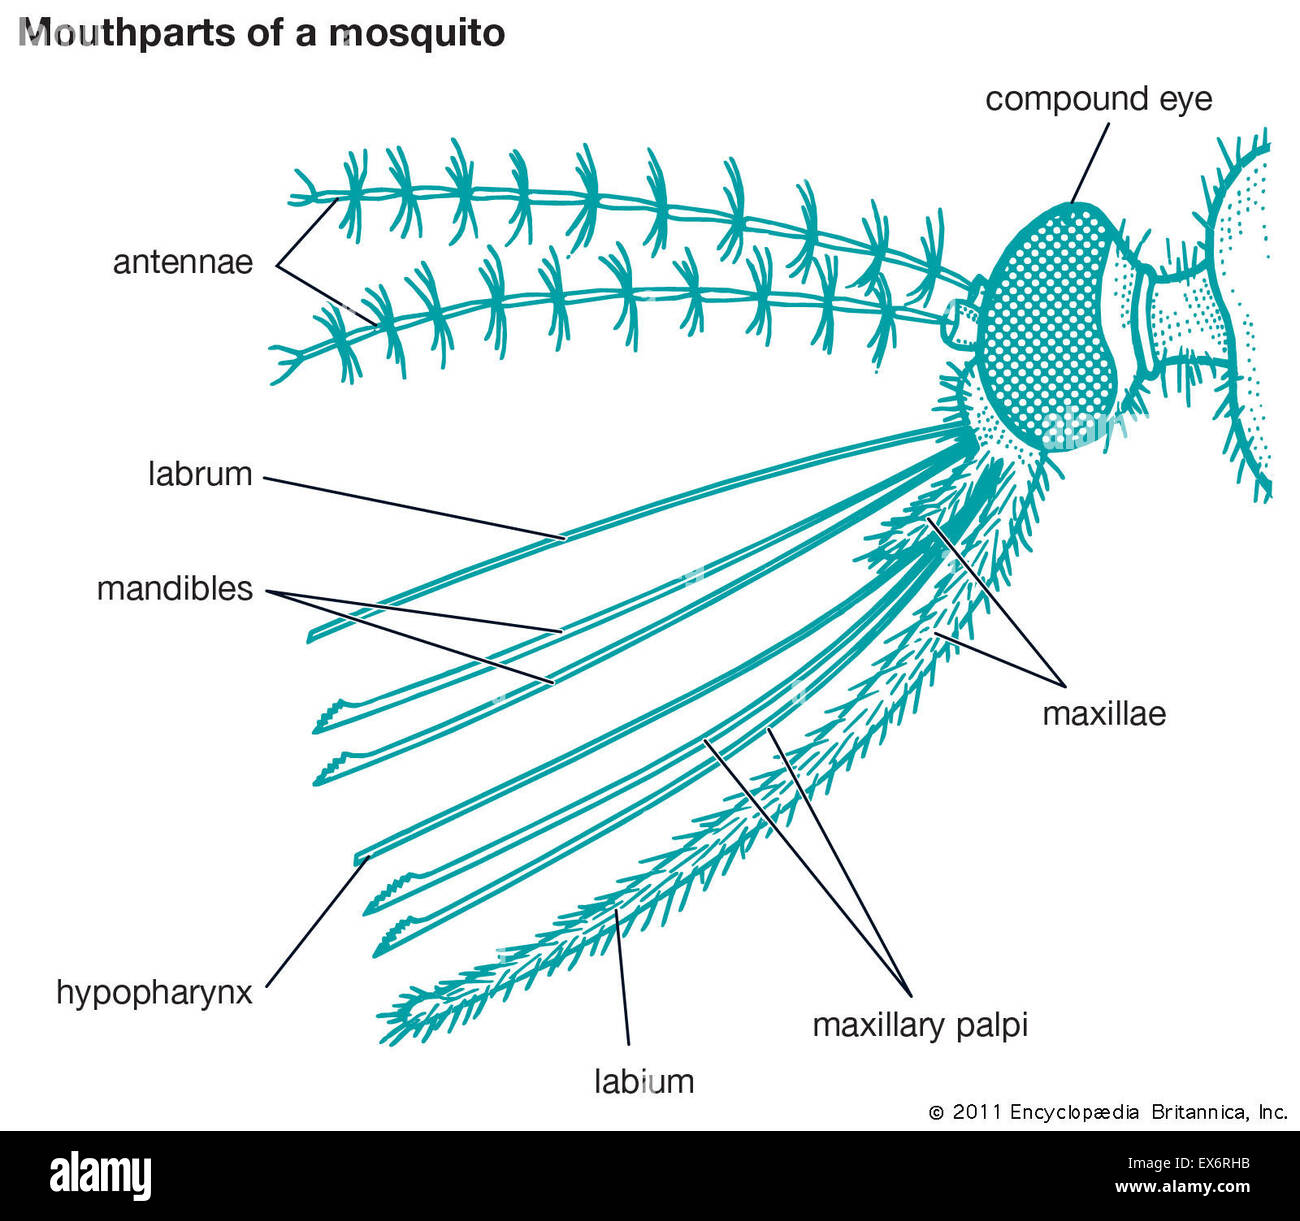 Mouthparts of a mosquito Stock Photo